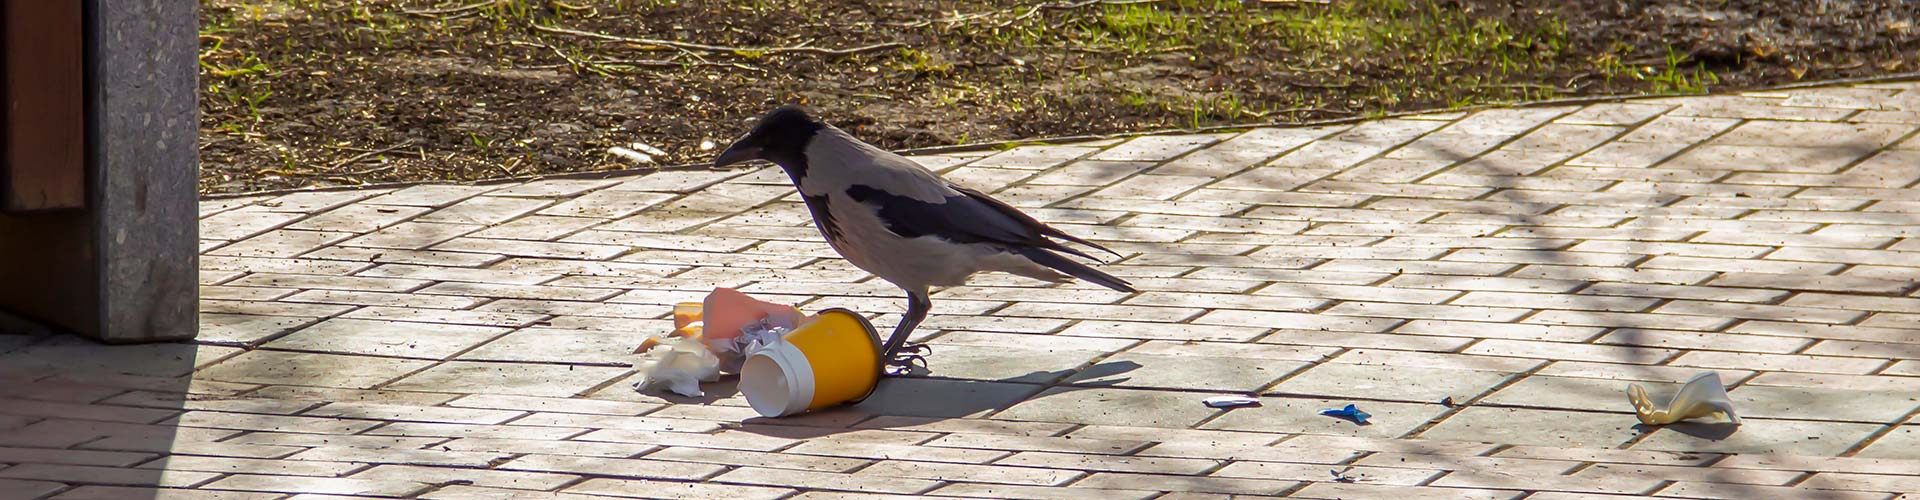 A bird standing on a broken cup in a yard protected by ELEET's bird removal